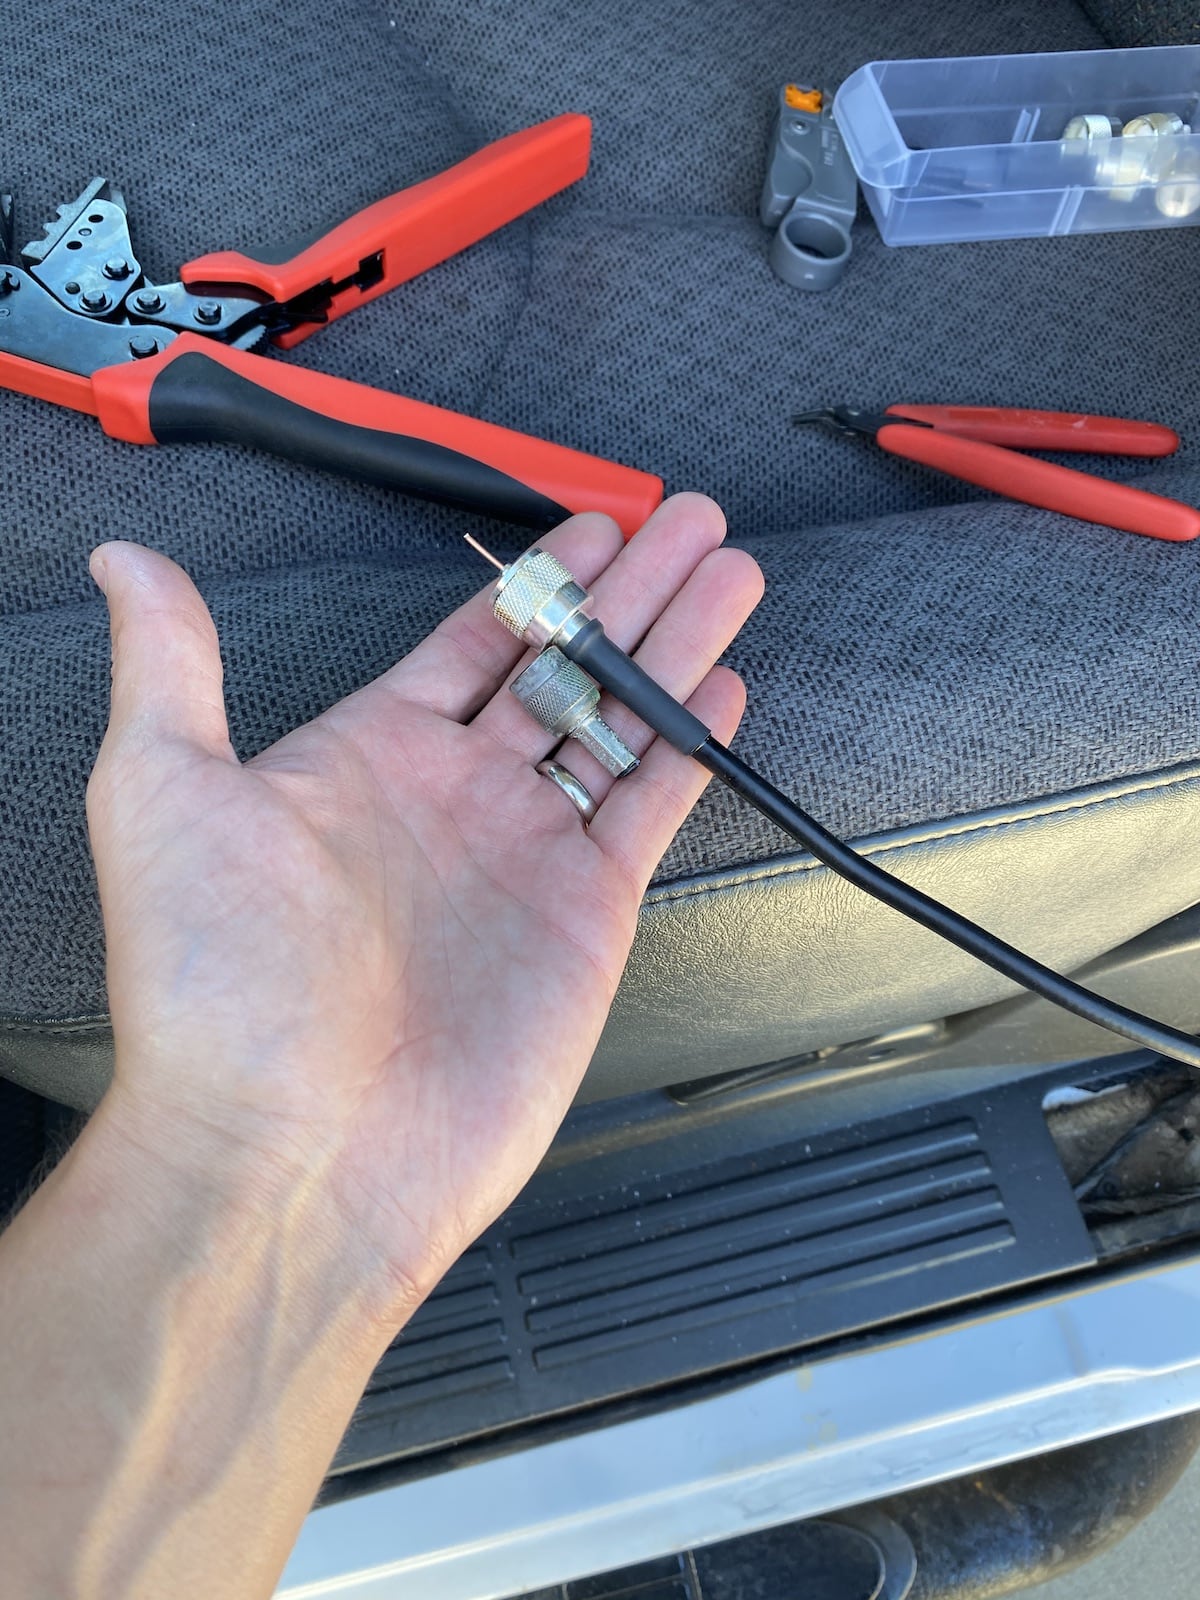 A hand holds
the end of a length of coaxial cable with a UHF connector attached. The center
conductor has not yet been trimmed or soldered. Next to the UHF connector is
an old and corroded TNC connector that has been clipped from the end of its
cable. Visible in the background is a truck seat with some wire cutters, a
crimping tool, and a coaxial cable stripping tool sitting on it.